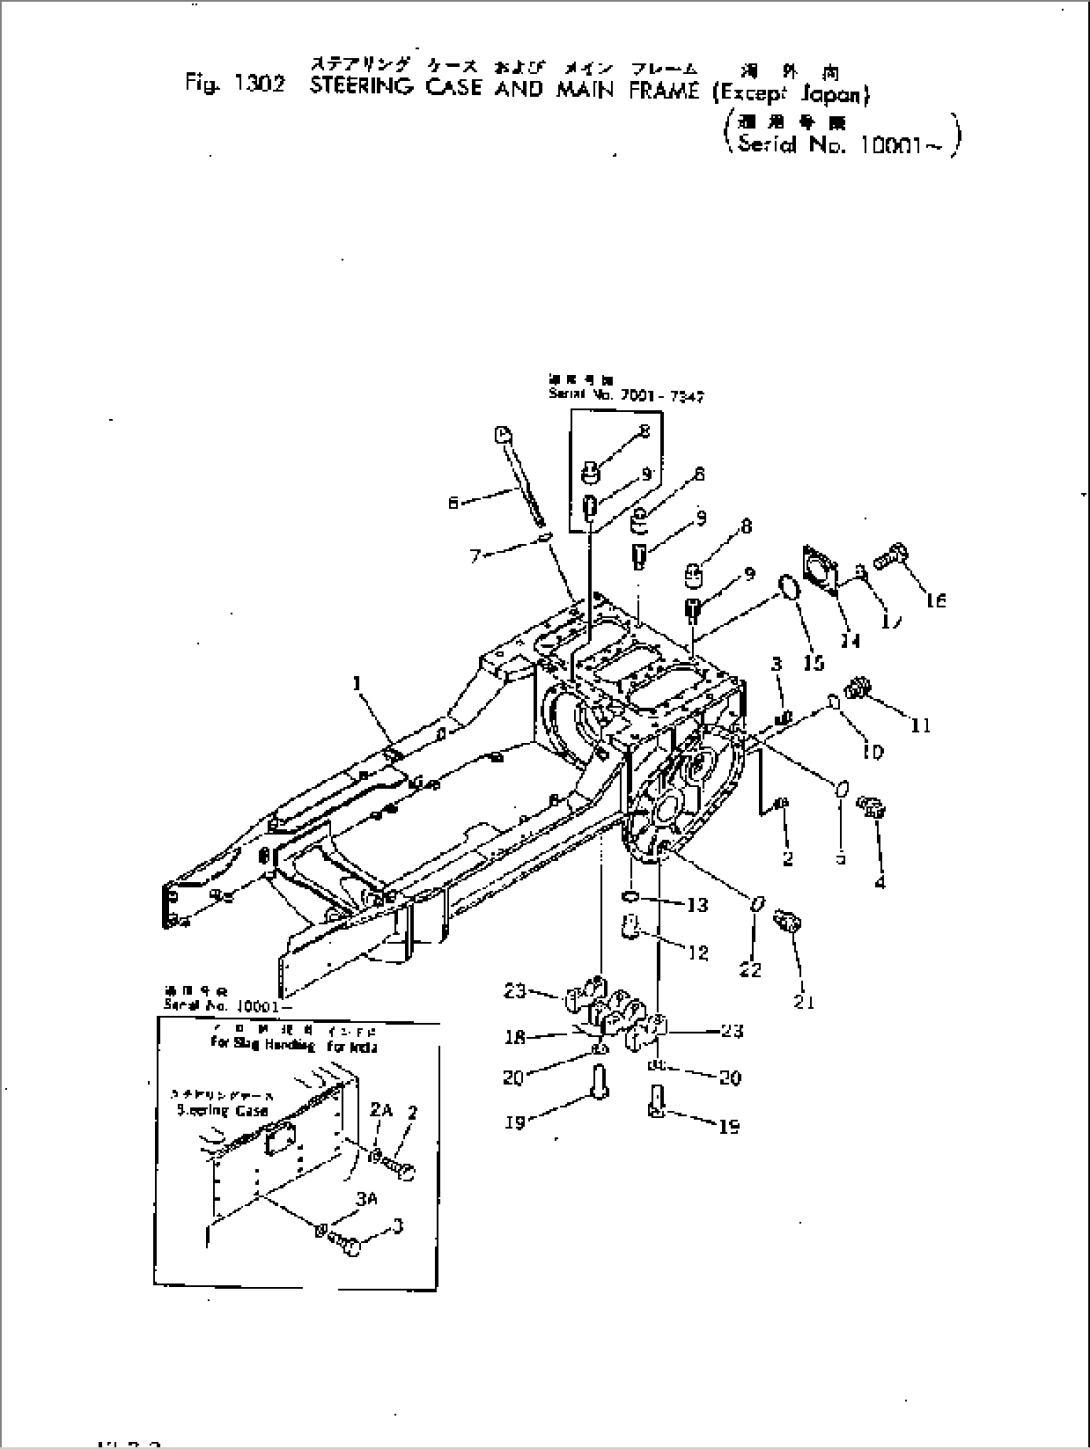 STEERING CASE AND MAIN FRAME (EXCEPT JAPAN)(#10001-)